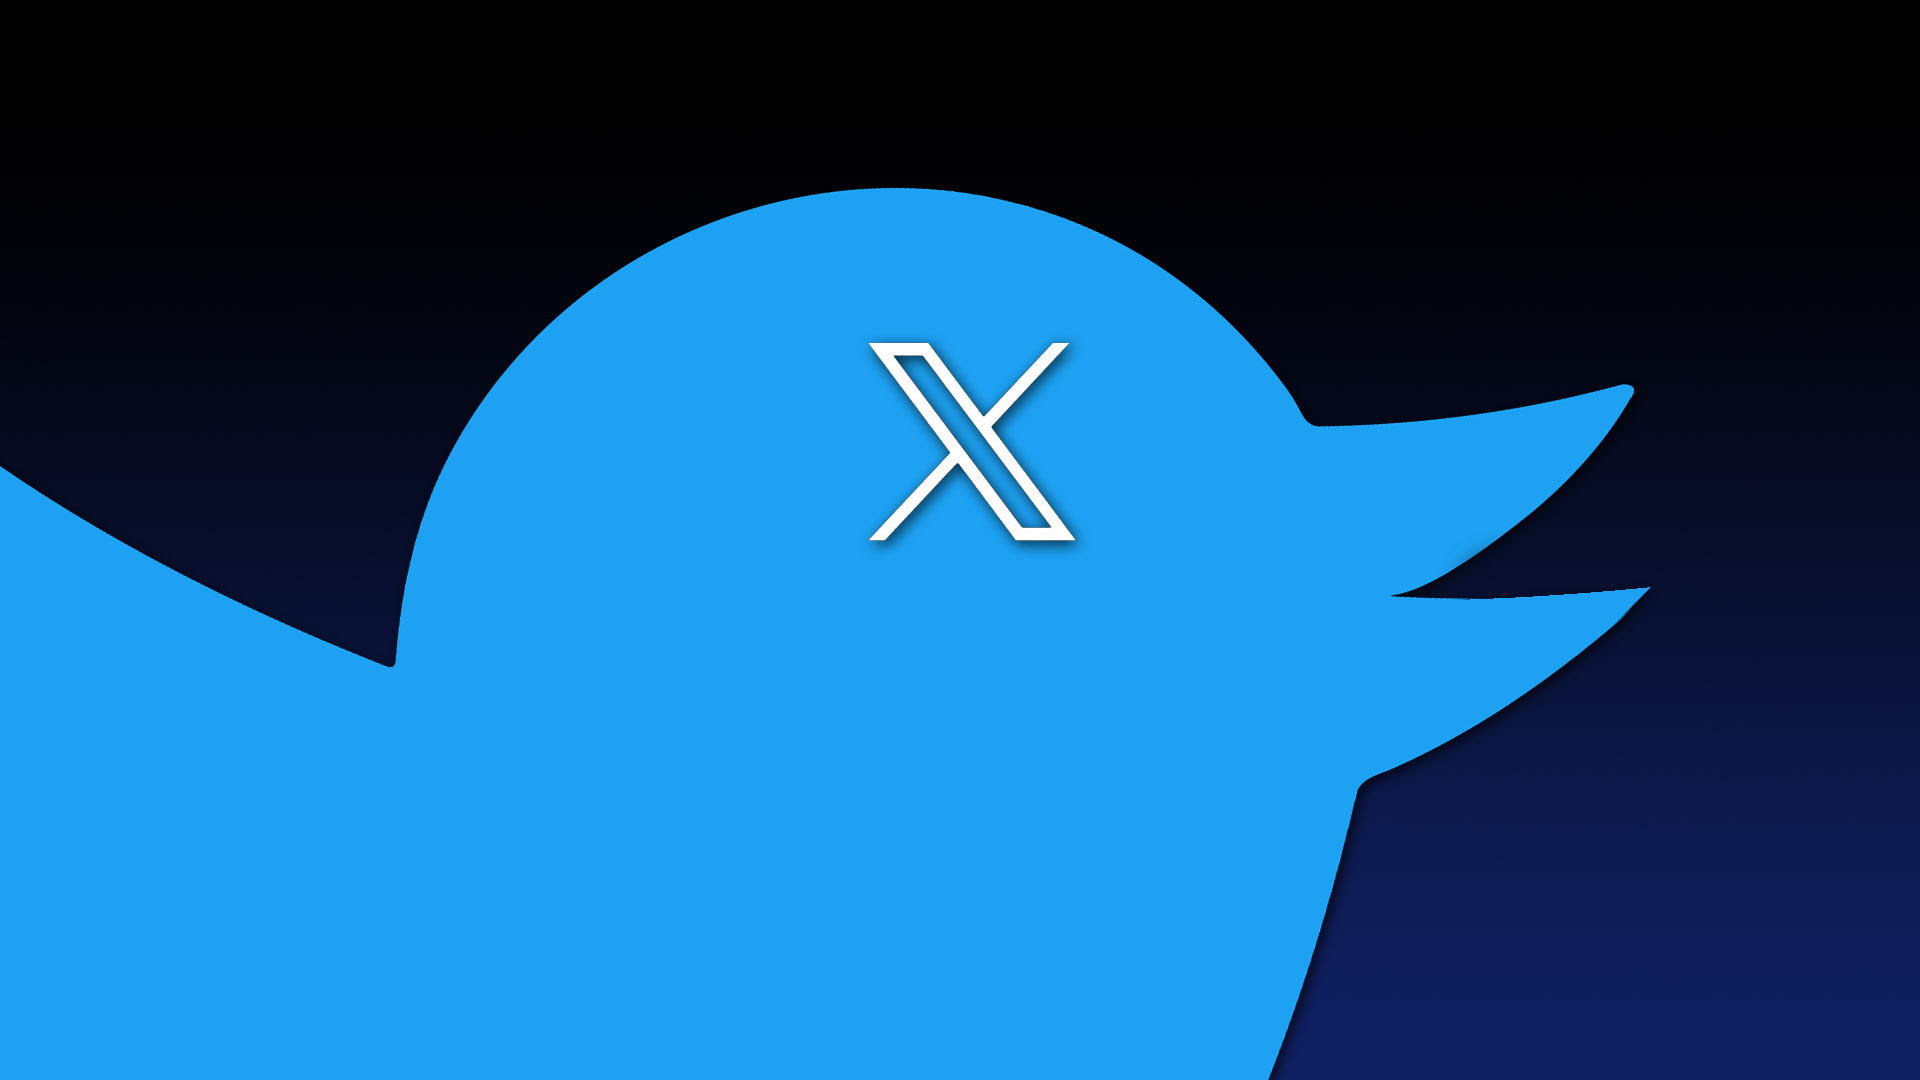 X (aka Twitter) used to be great for customer service. Here’s where to go now